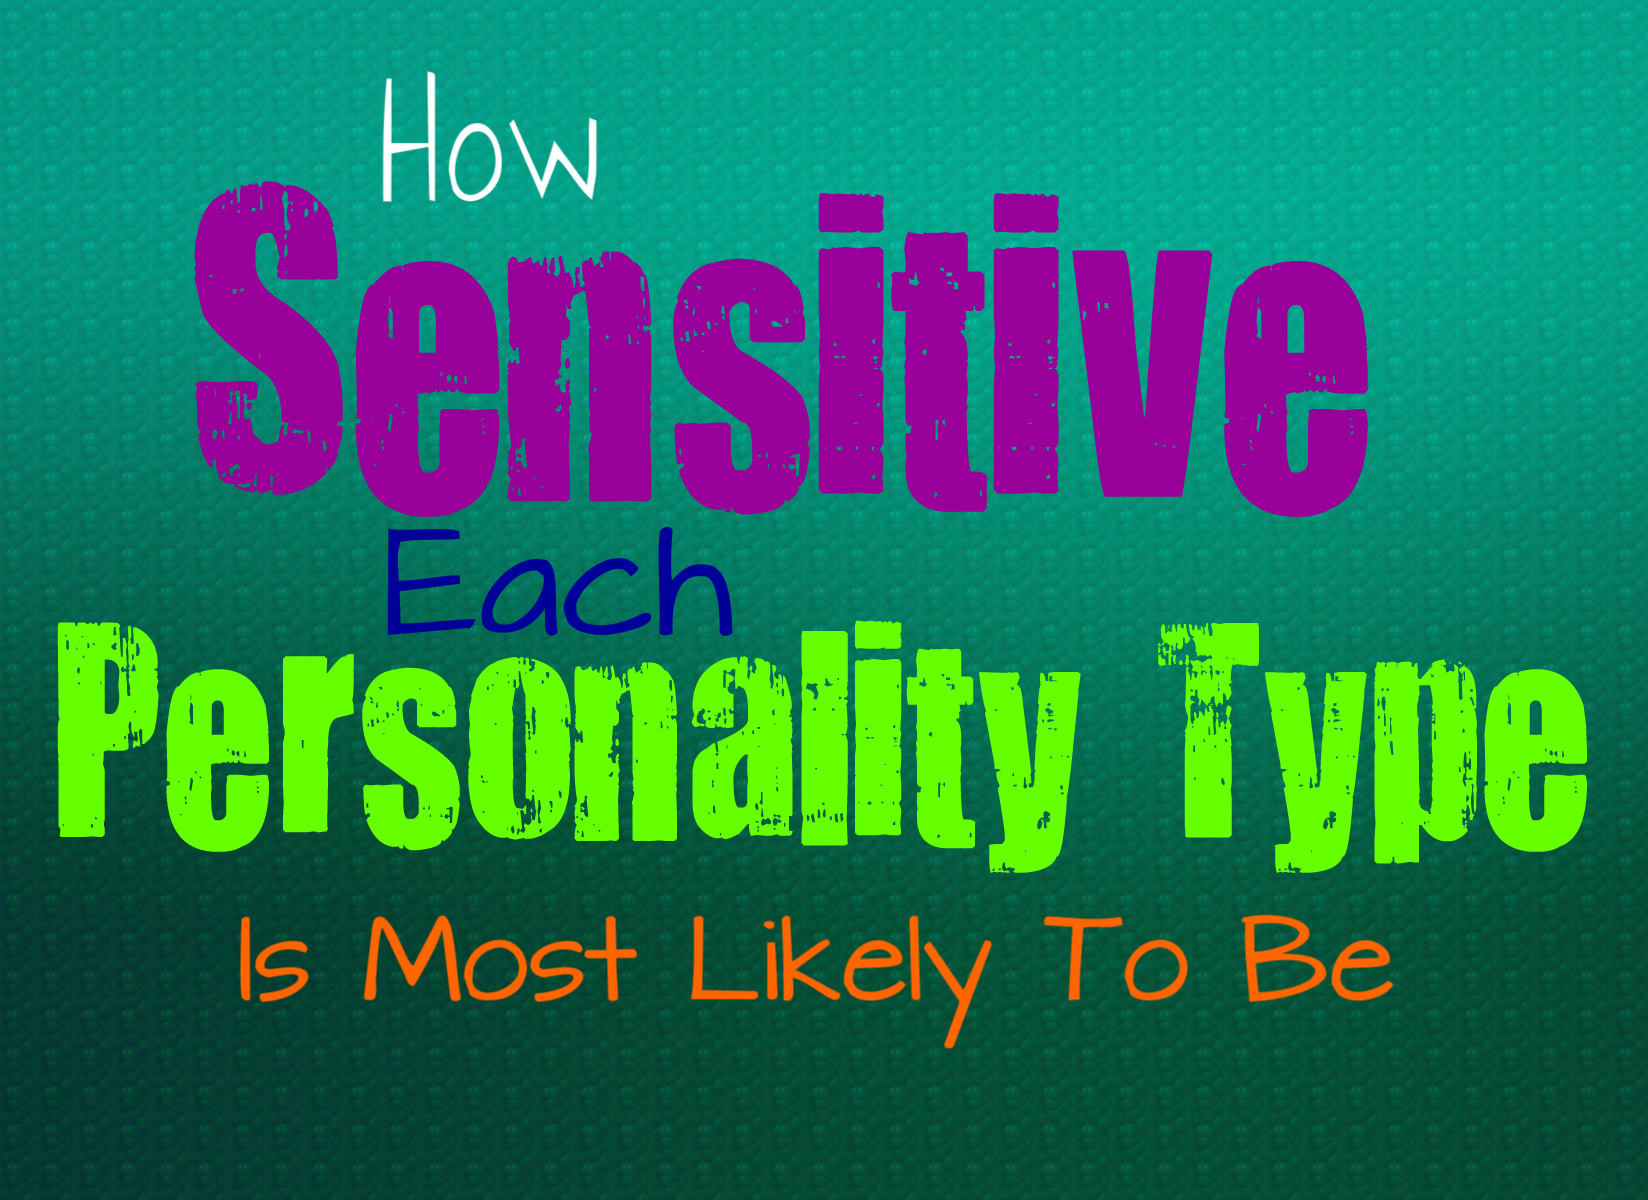 Which MBTI is highly sensitive?